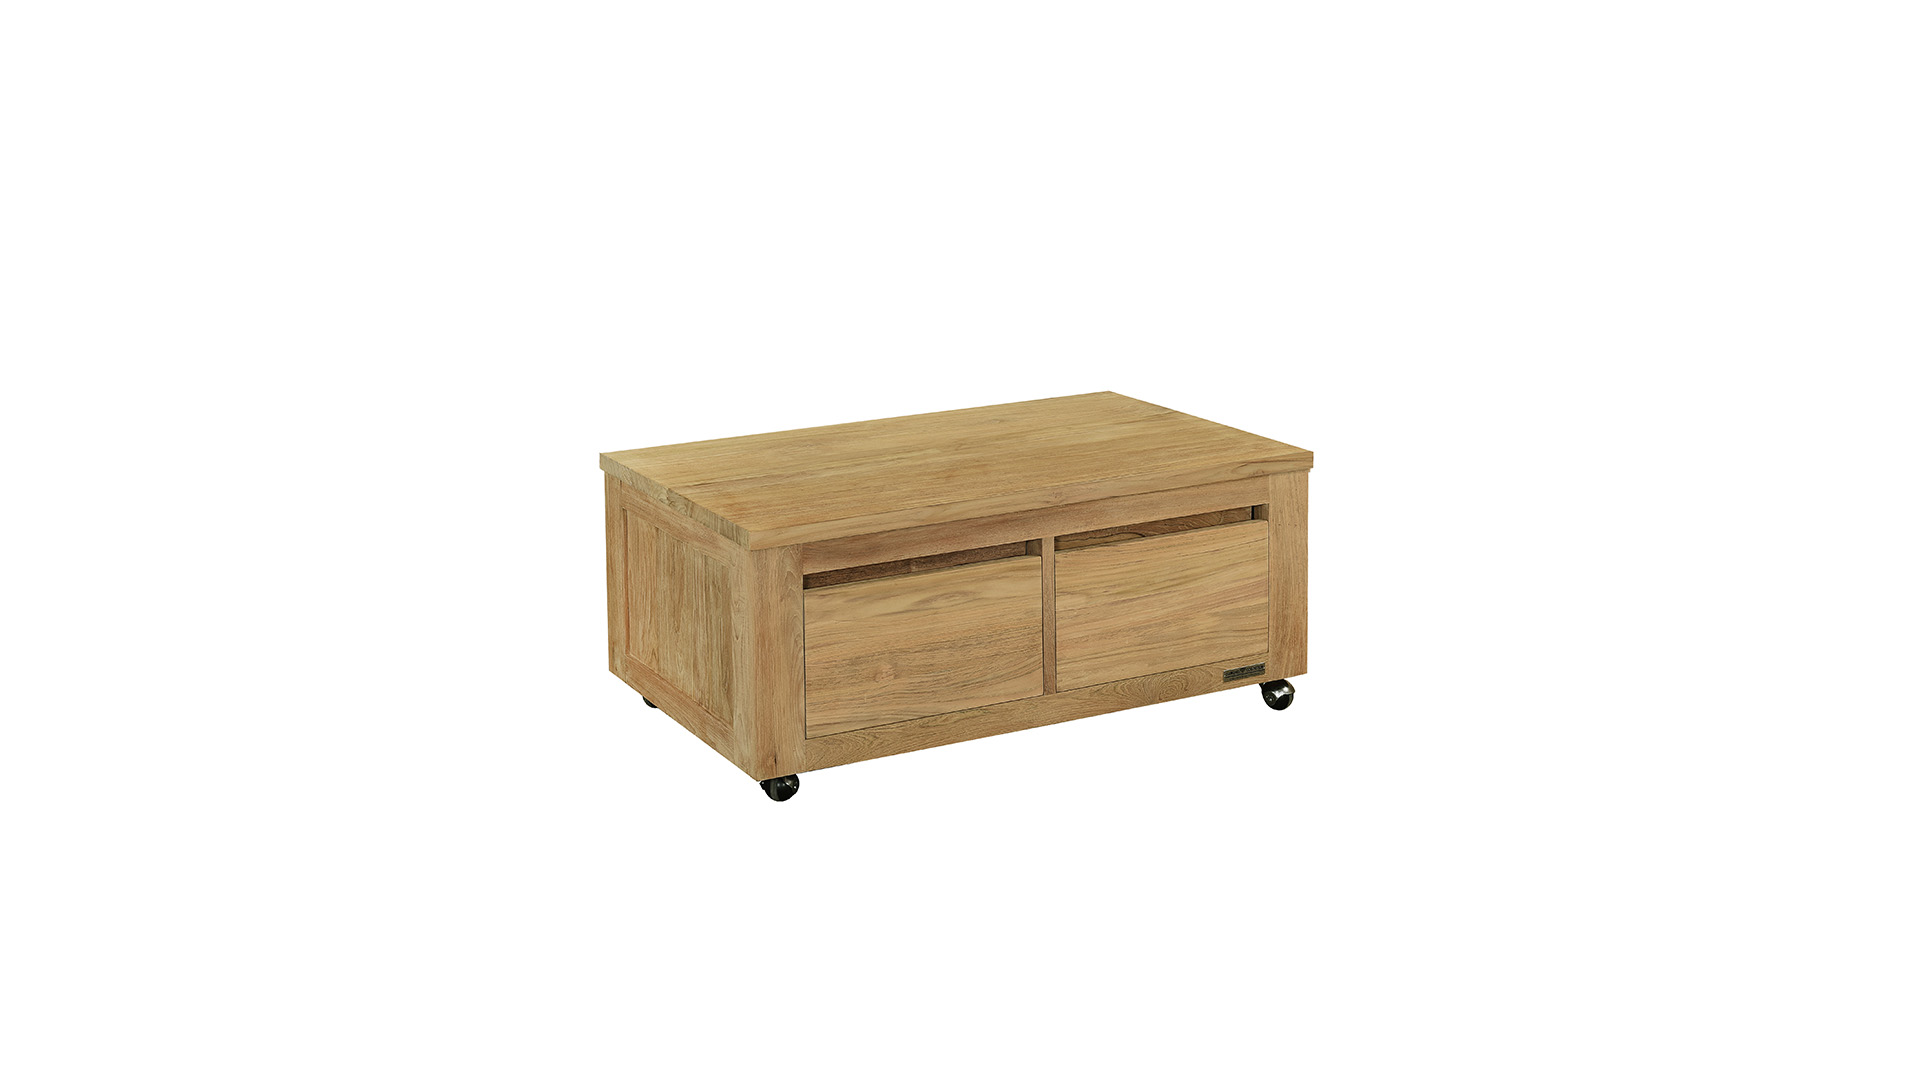 Coffee table with 2 handleless drawers On Wheels 100 x 60cm Diamond Collection